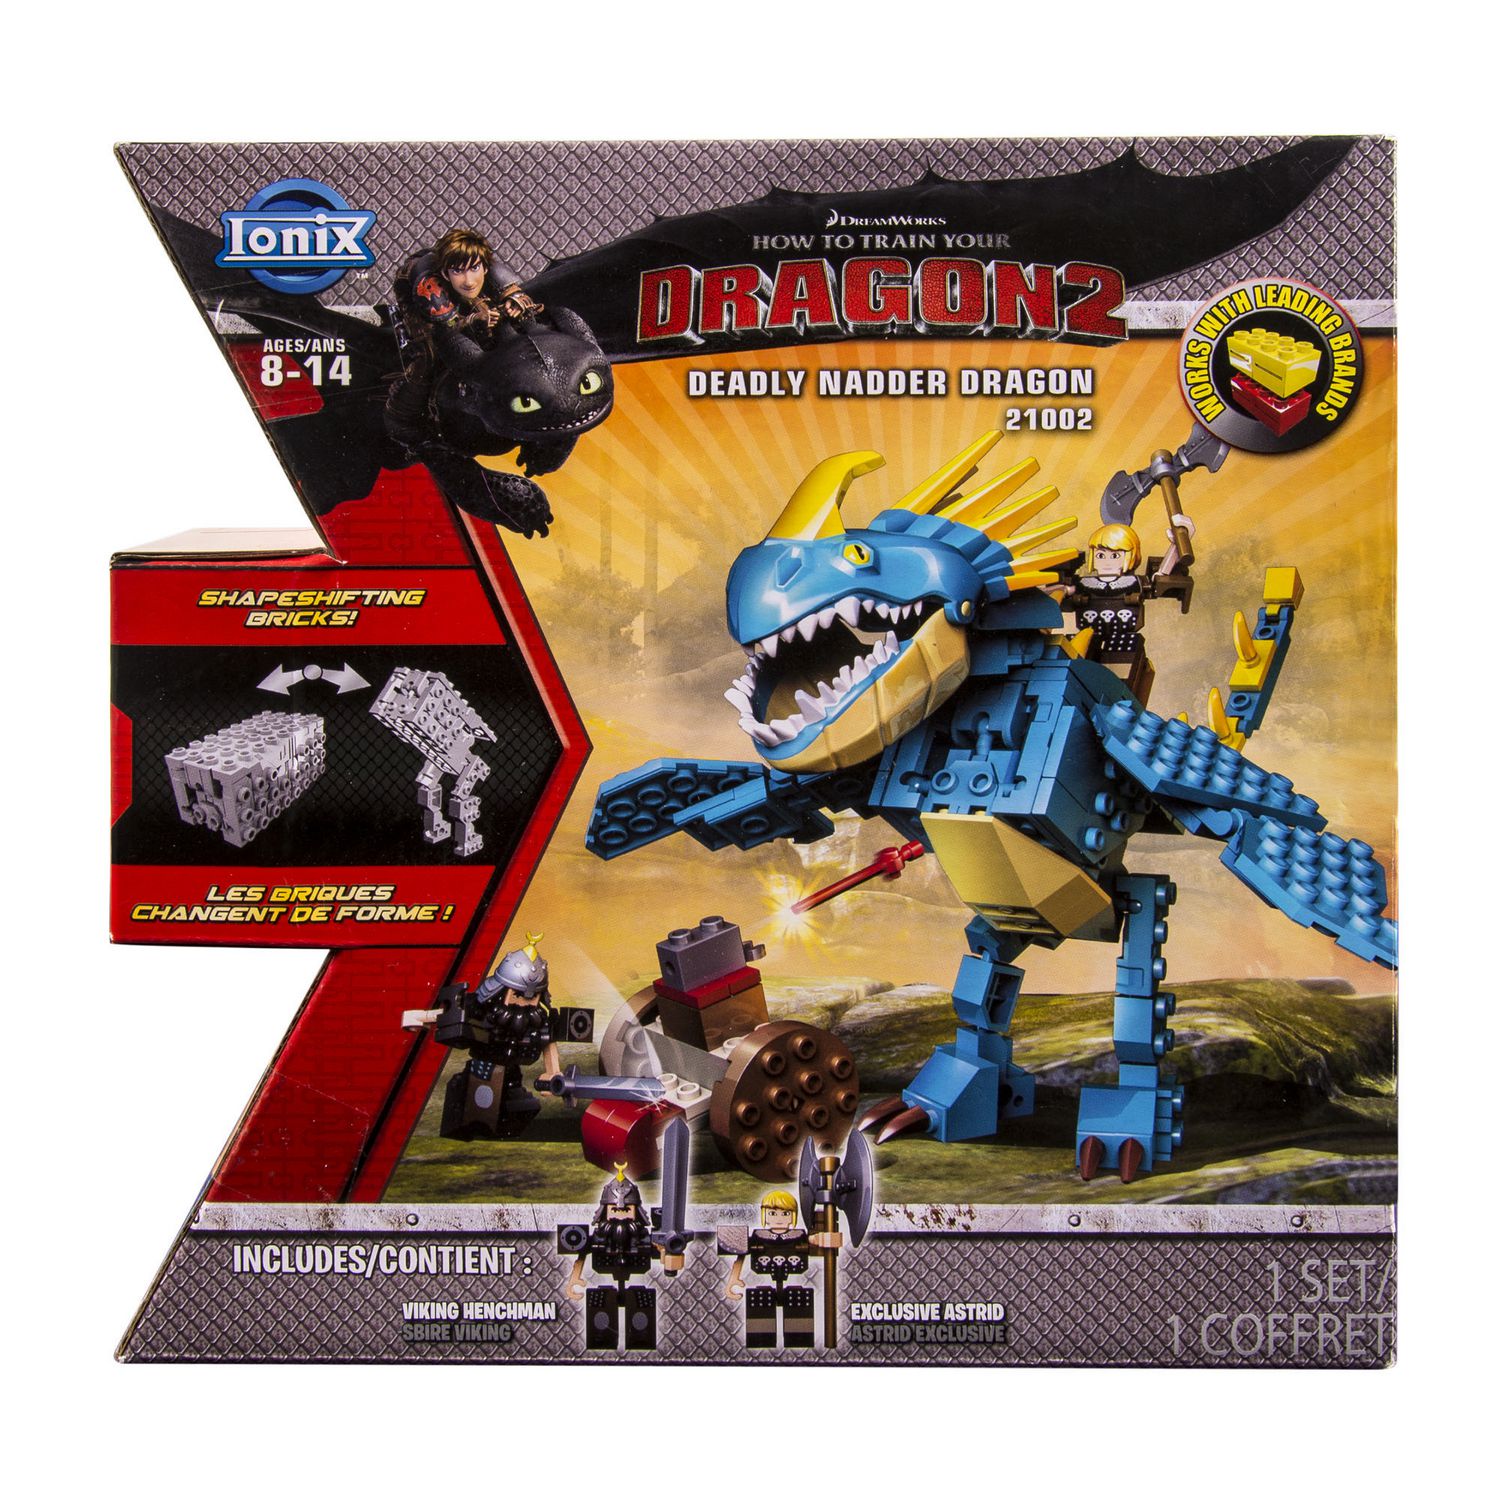 IONIX: How to Train Your Dragon 2 – Nadder Large Dragon Set 21002